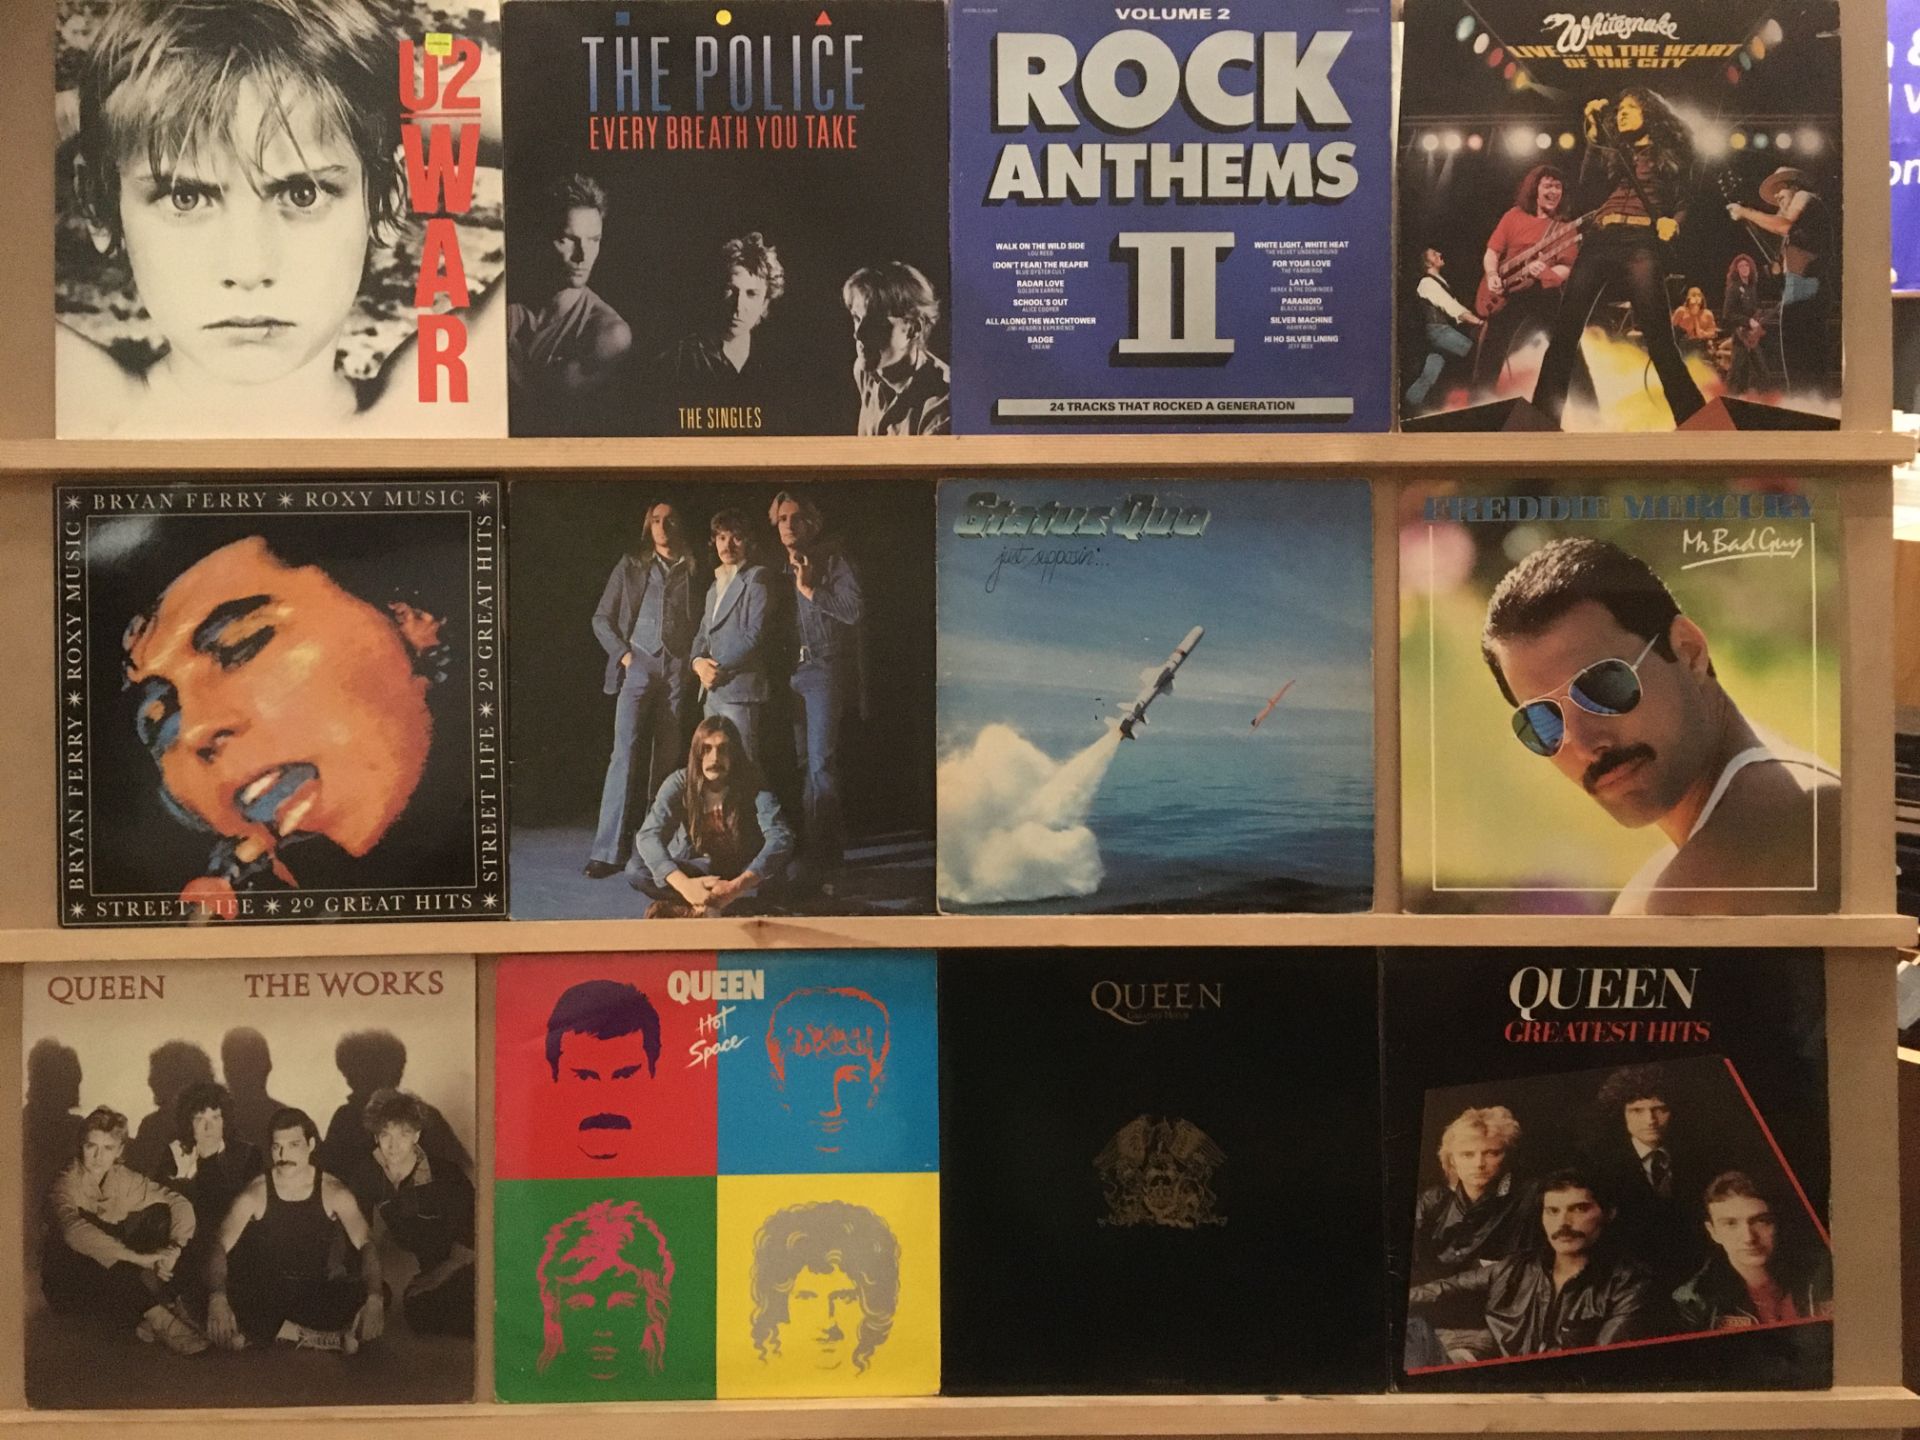 12 LPs - Queen (4), Freddie Mercury, Status Quo (2), The Police, U2, Bryan Ferry and Roxy Music,